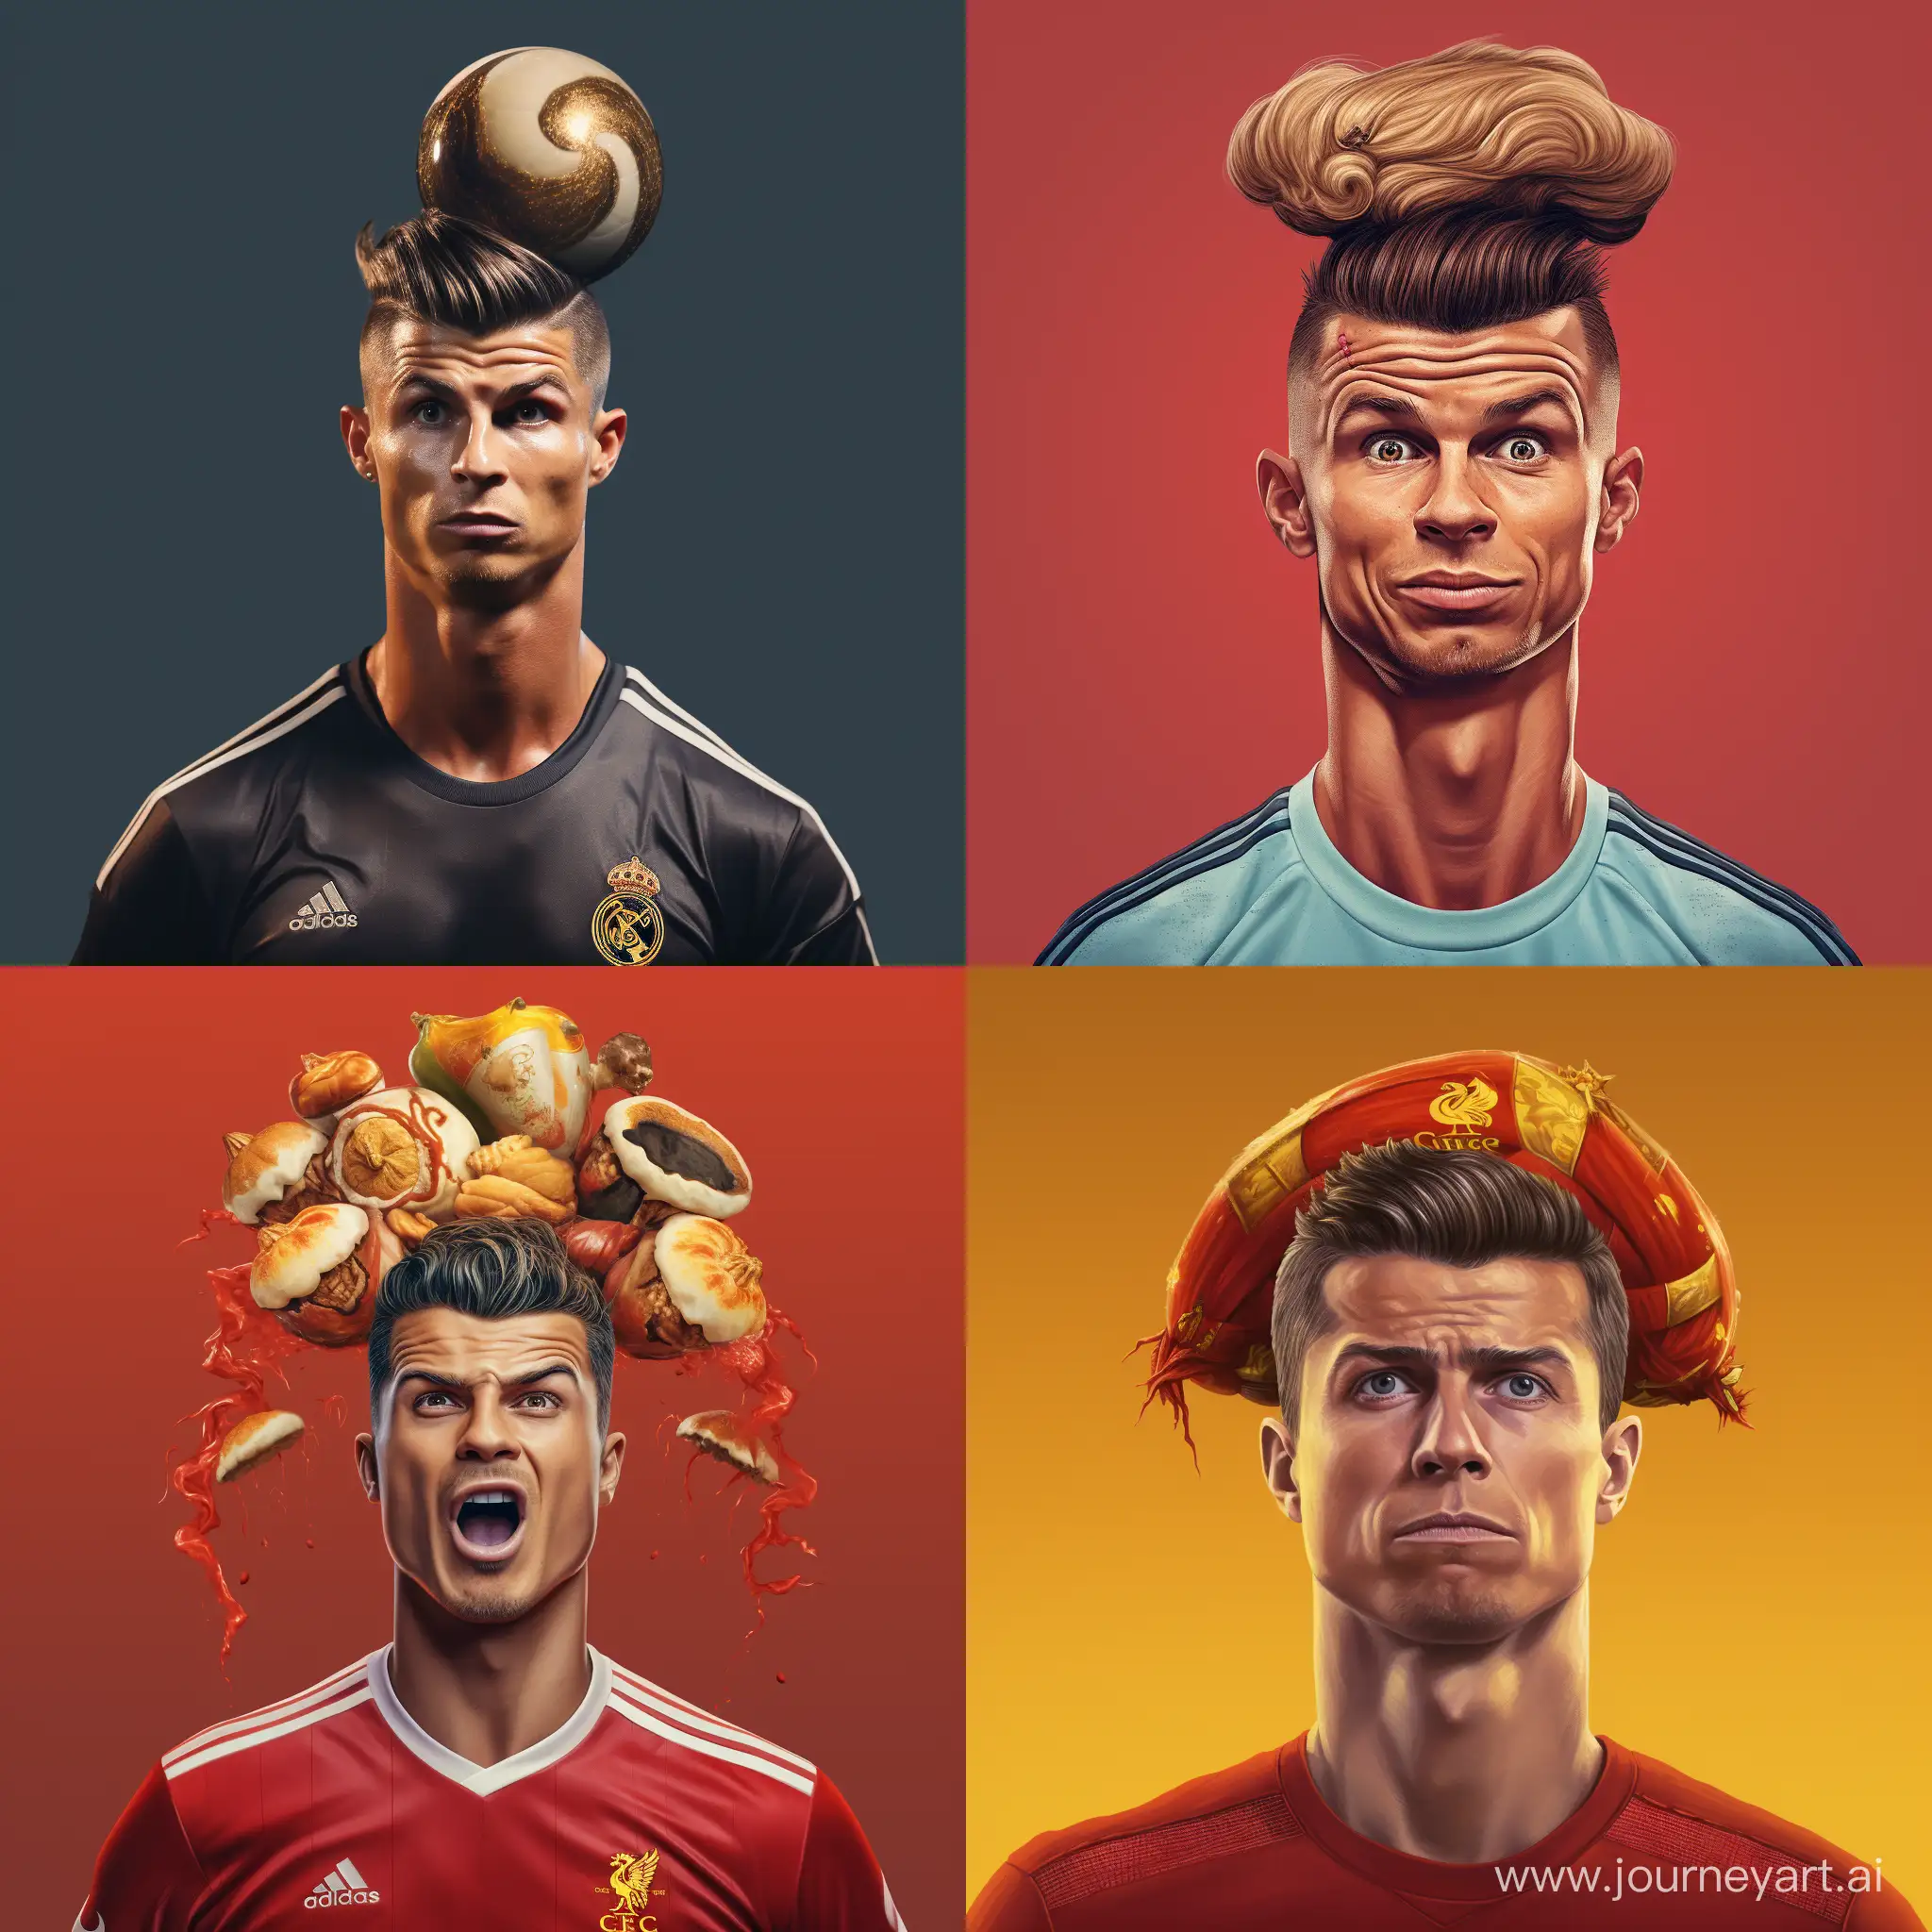 Cristiano Ronaldo as with cawl on head